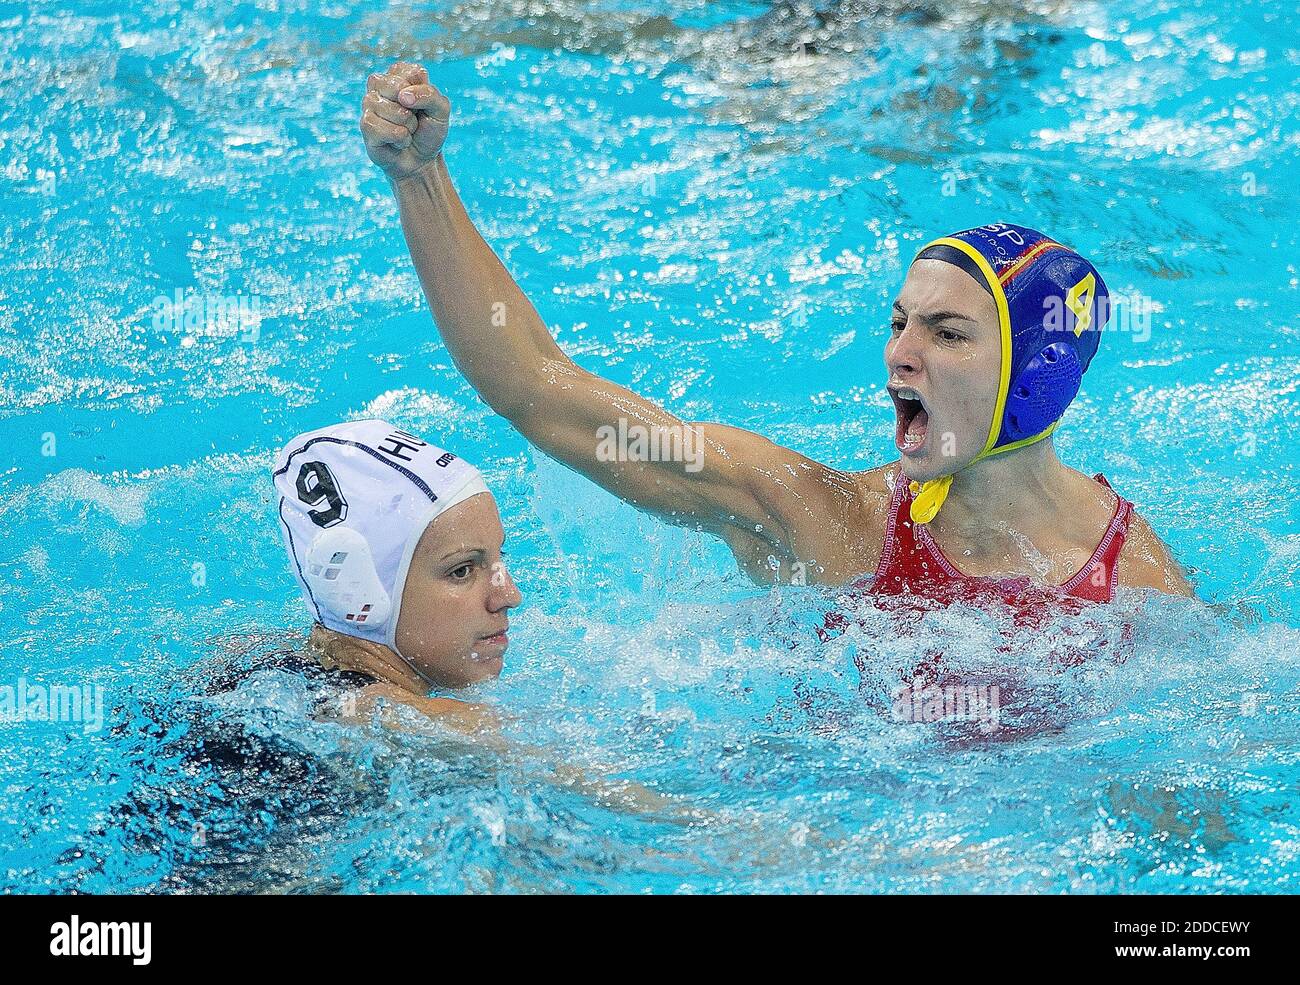 NO FILM, NO VIDEO, NO TV, NO DOCUMENTARY - Spain's Roser Tarrago  Aymerich(4) celebrates her goal against Hungary during their semifinal  match at the Water Polo Arena in Olympic Park during the